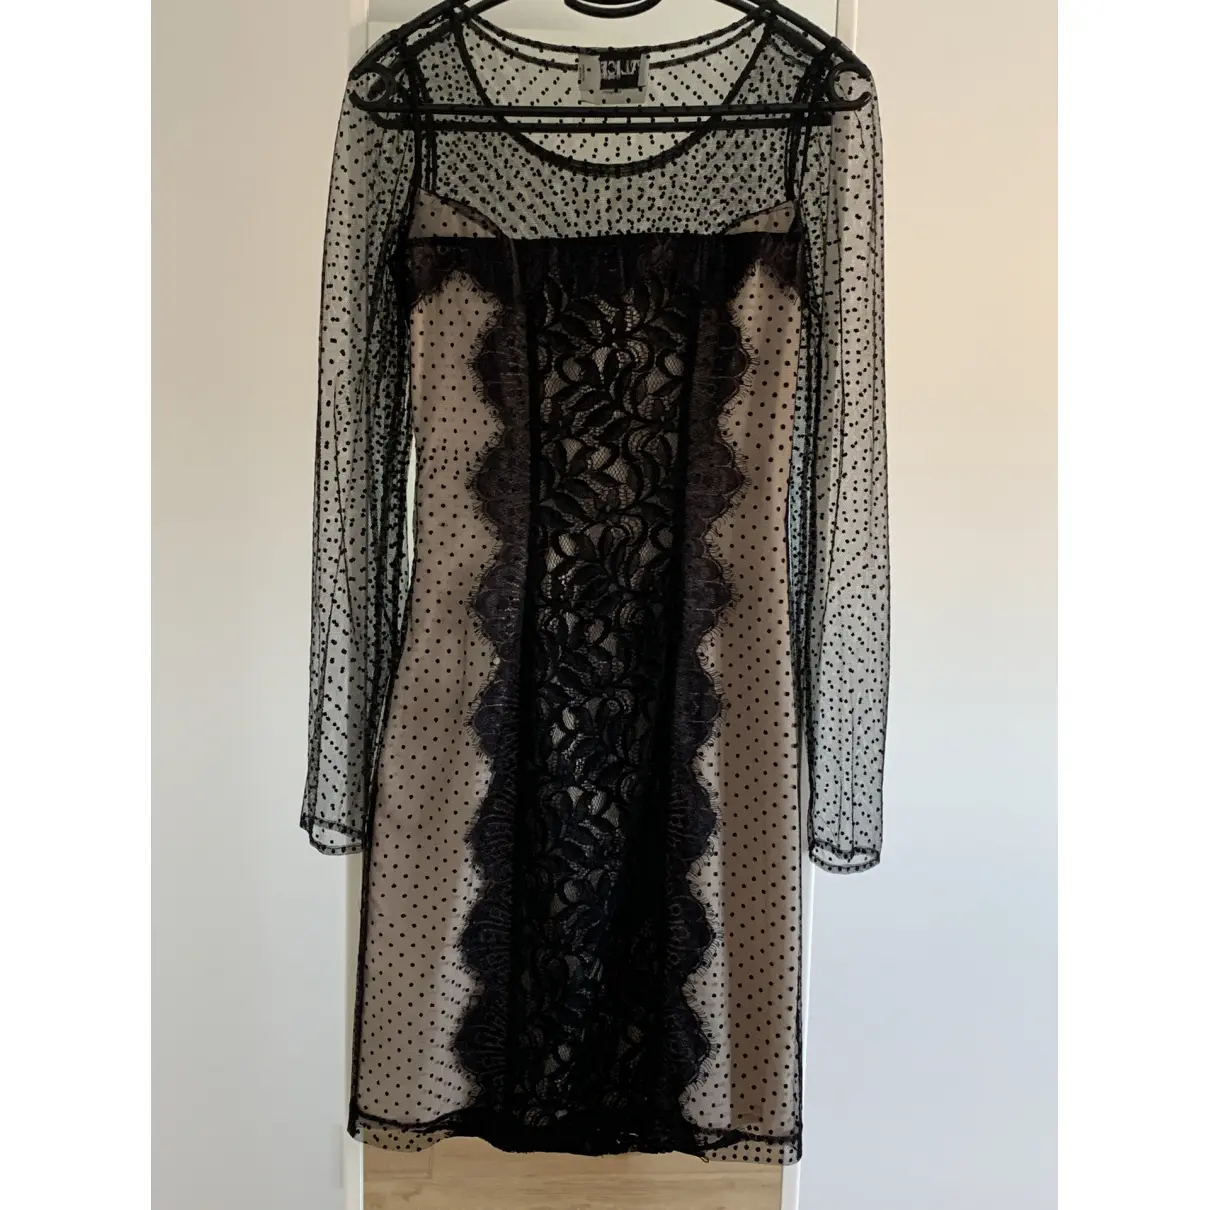 Buy Alice by Temperley Mid-length dress online